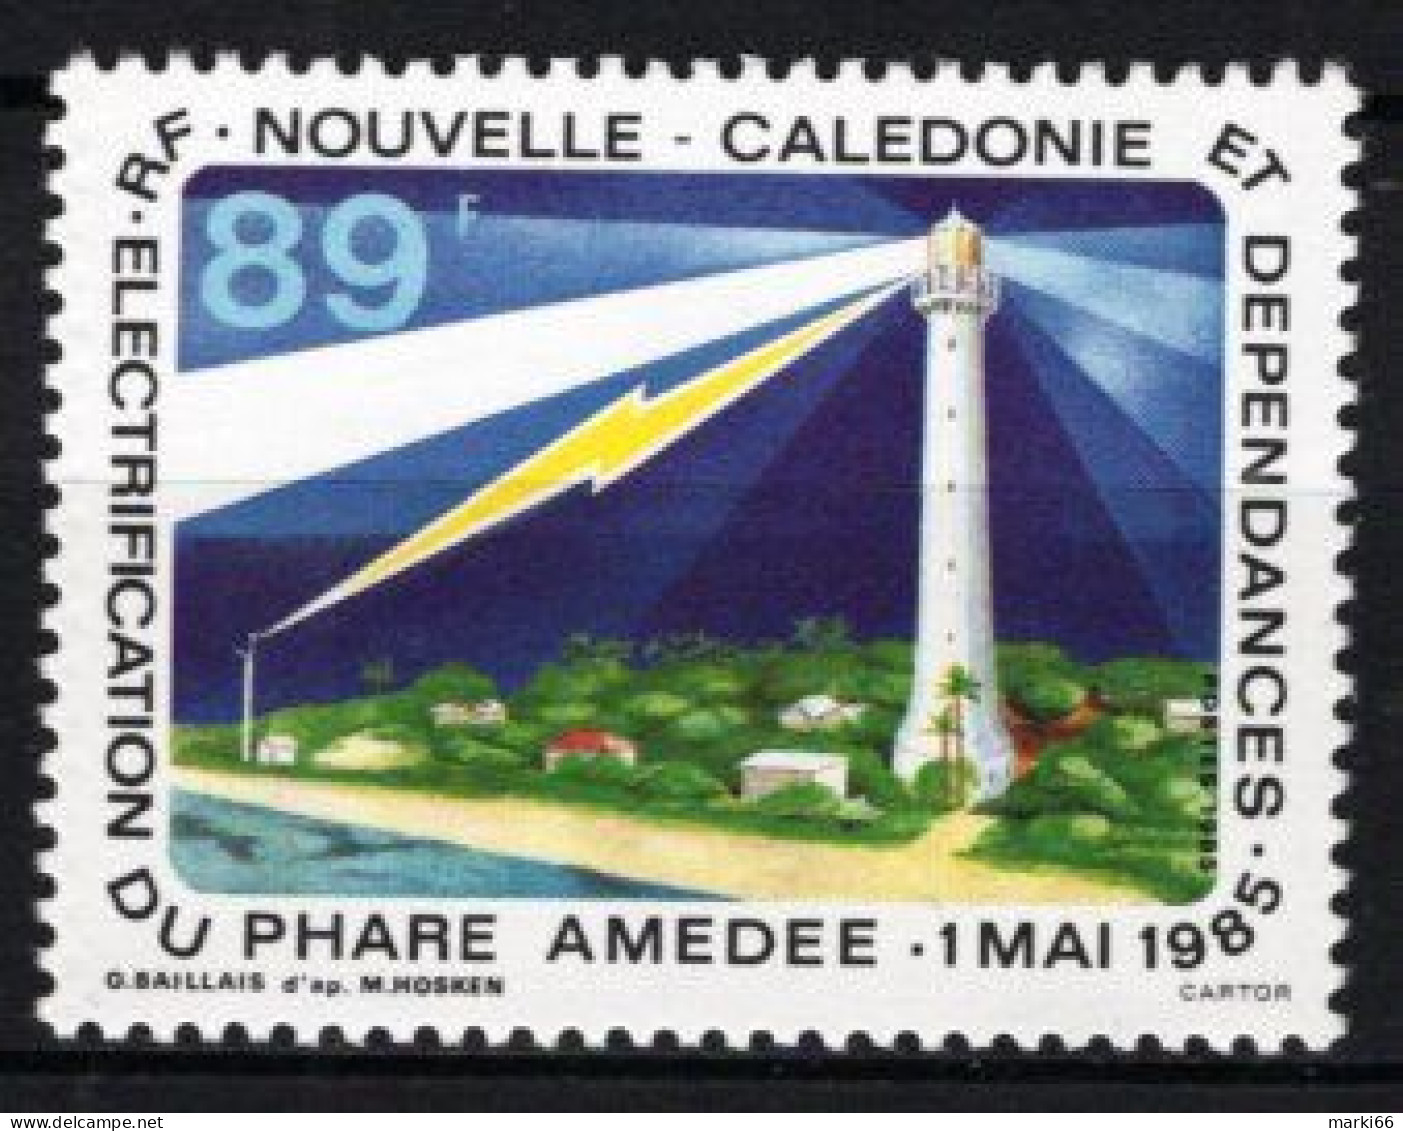 New Caledonia - 1985 - Electrification Amedee Lighthouse In 1985 - Mint Stamp - Unused Stamps